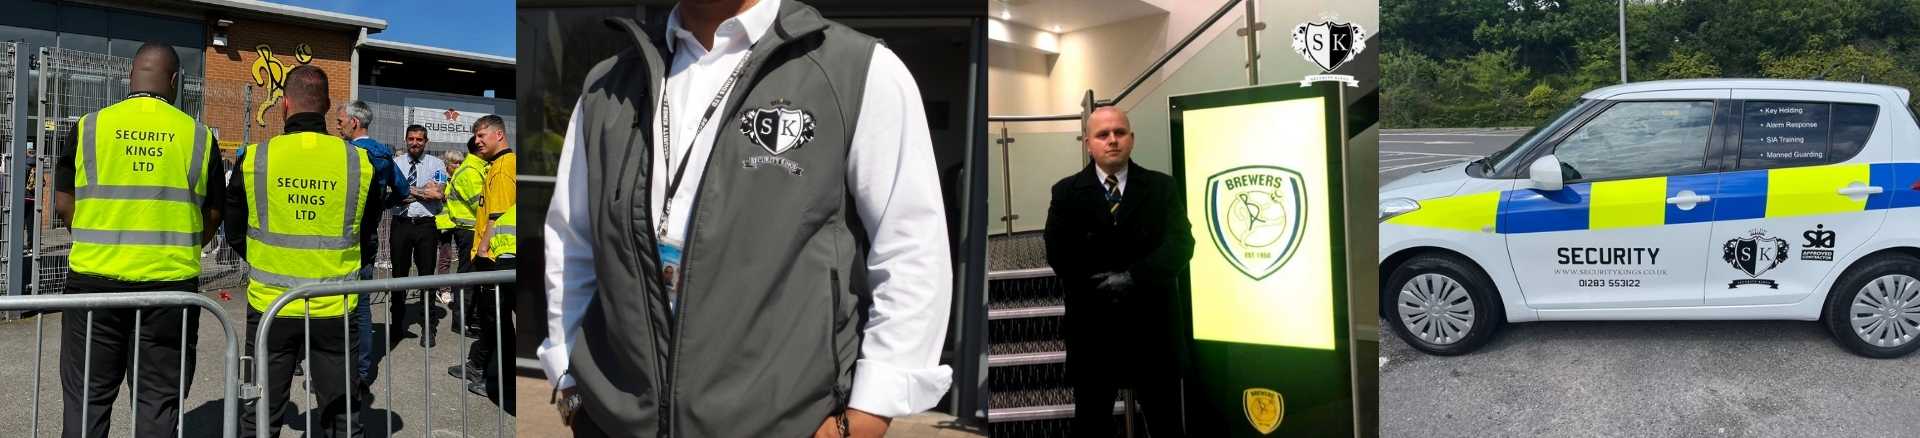 Security staffordshire burton security guards including events, mobile security and manned guards